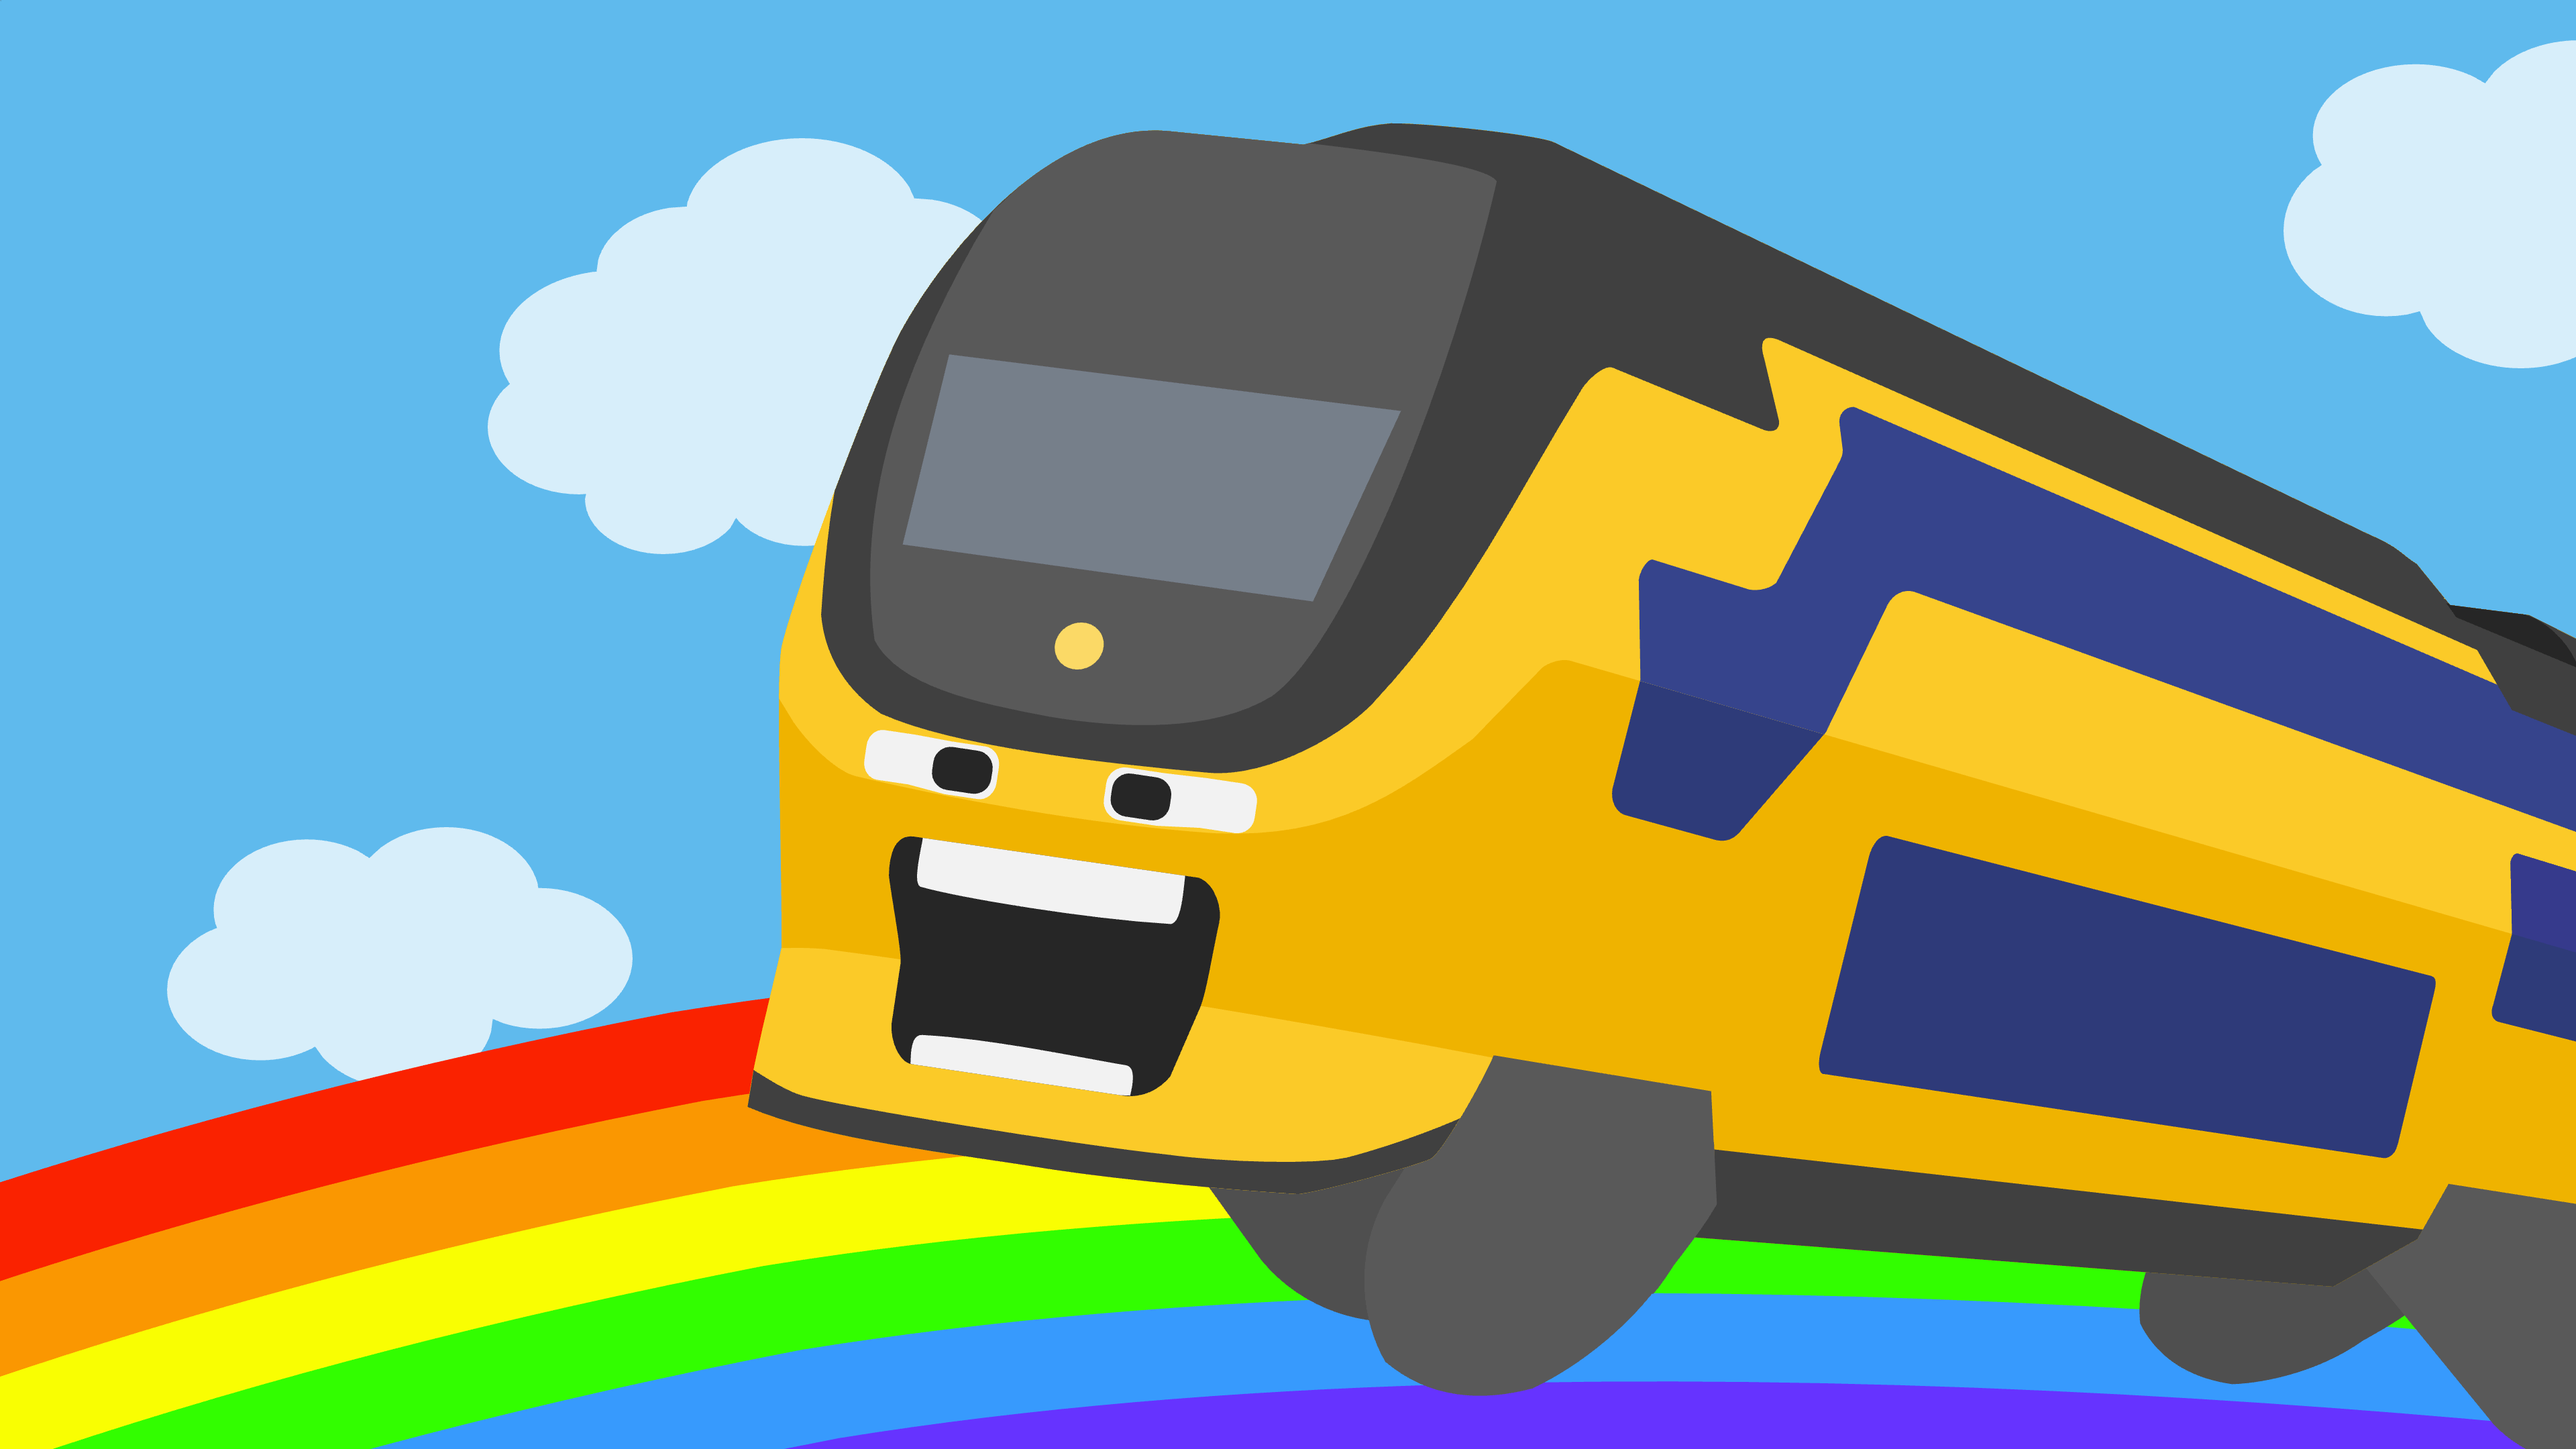 Anthropomorphic VIRM train with a dumb face rides across a rainbow in the sky